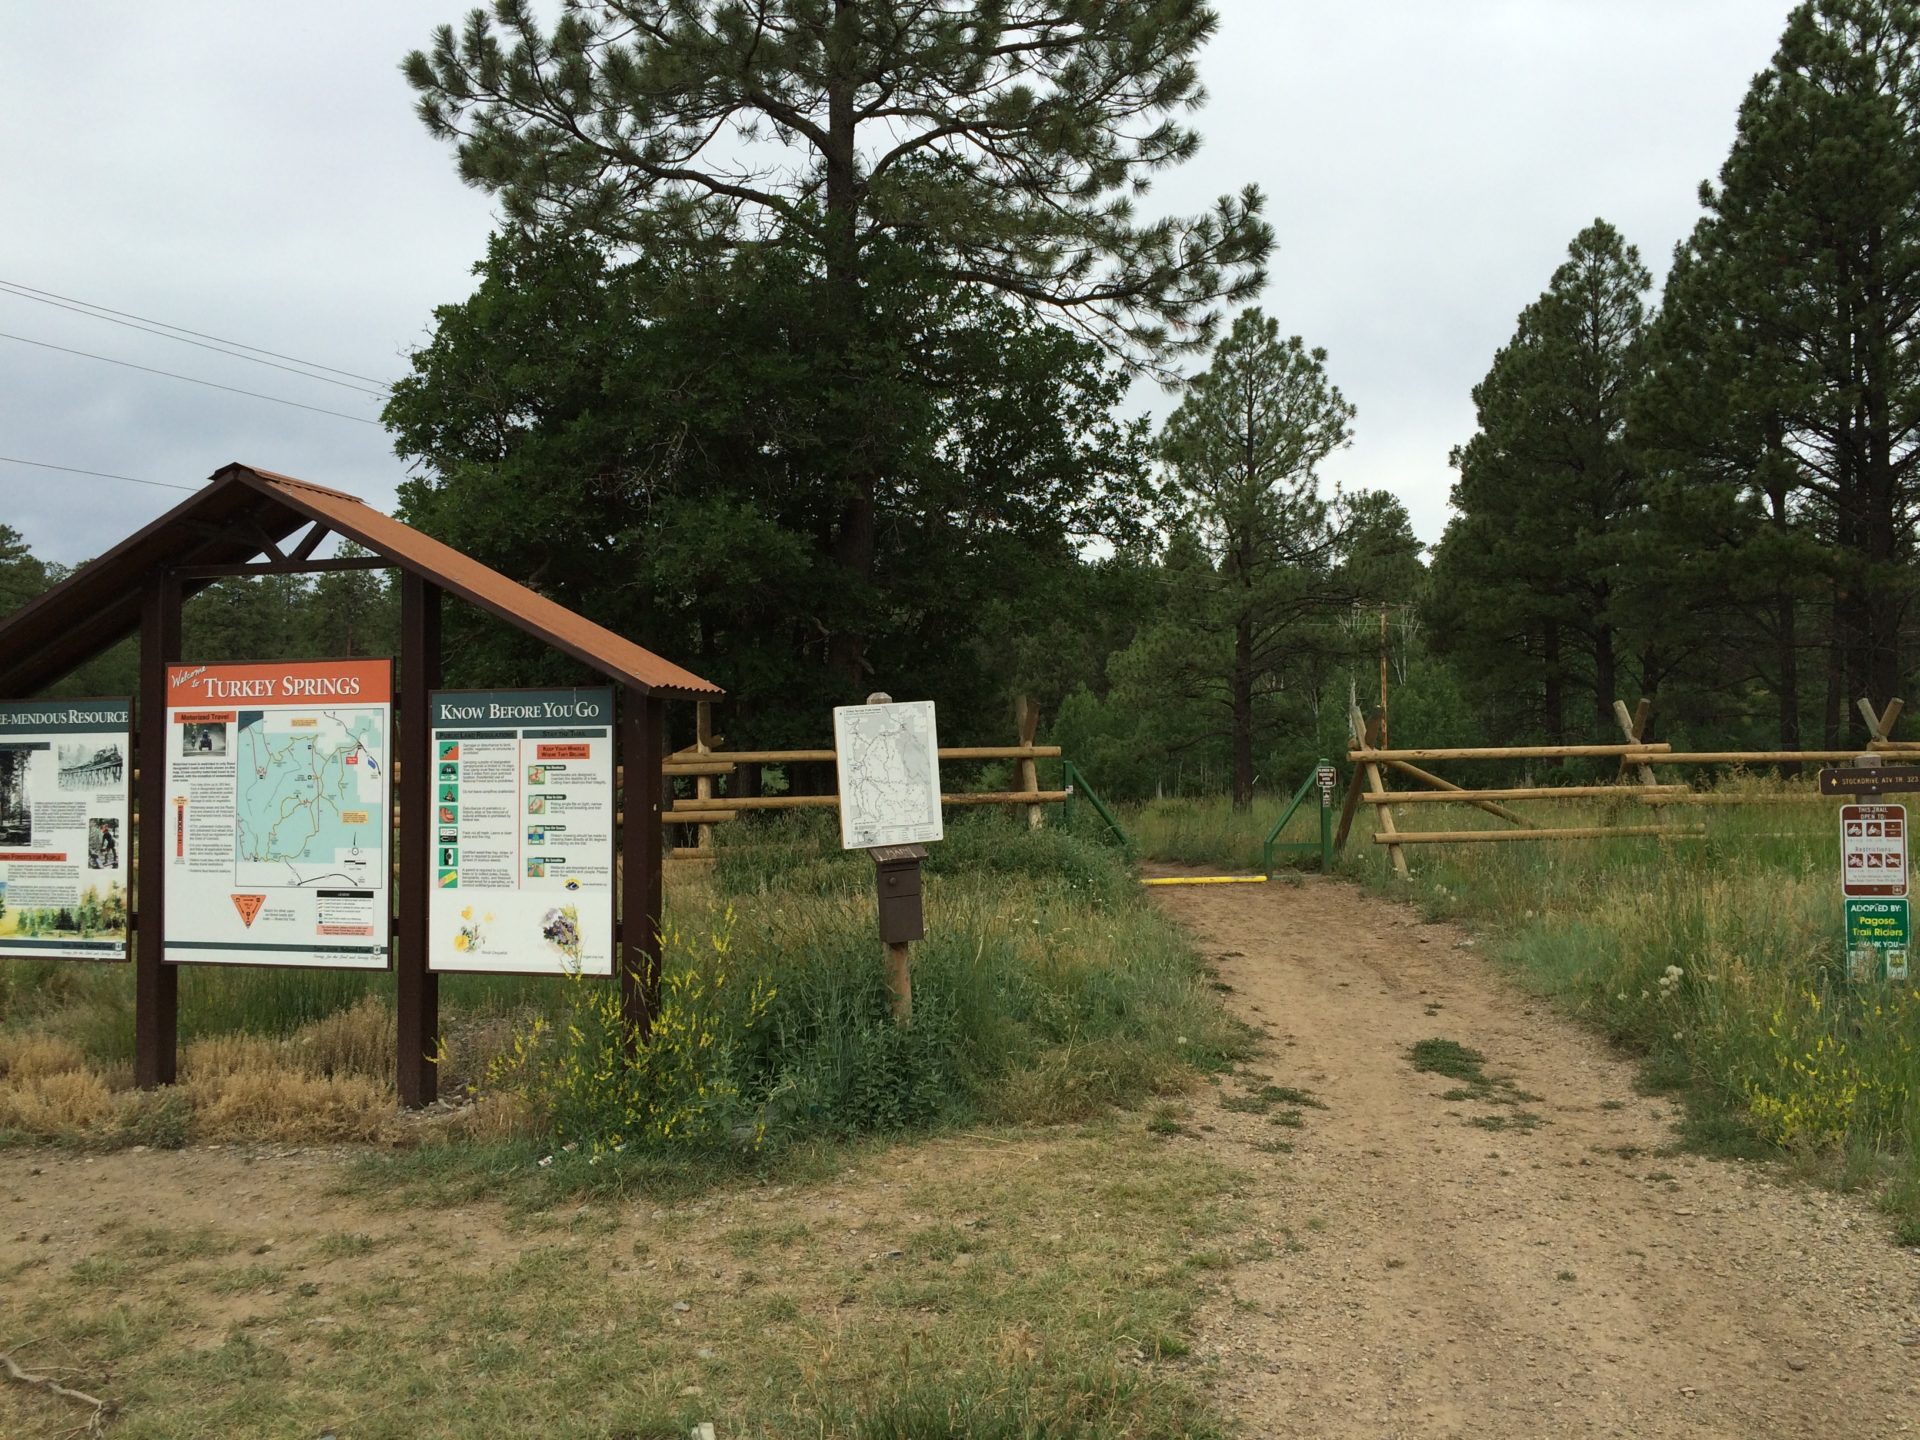 A trailhead information sign at Turkey Springs.